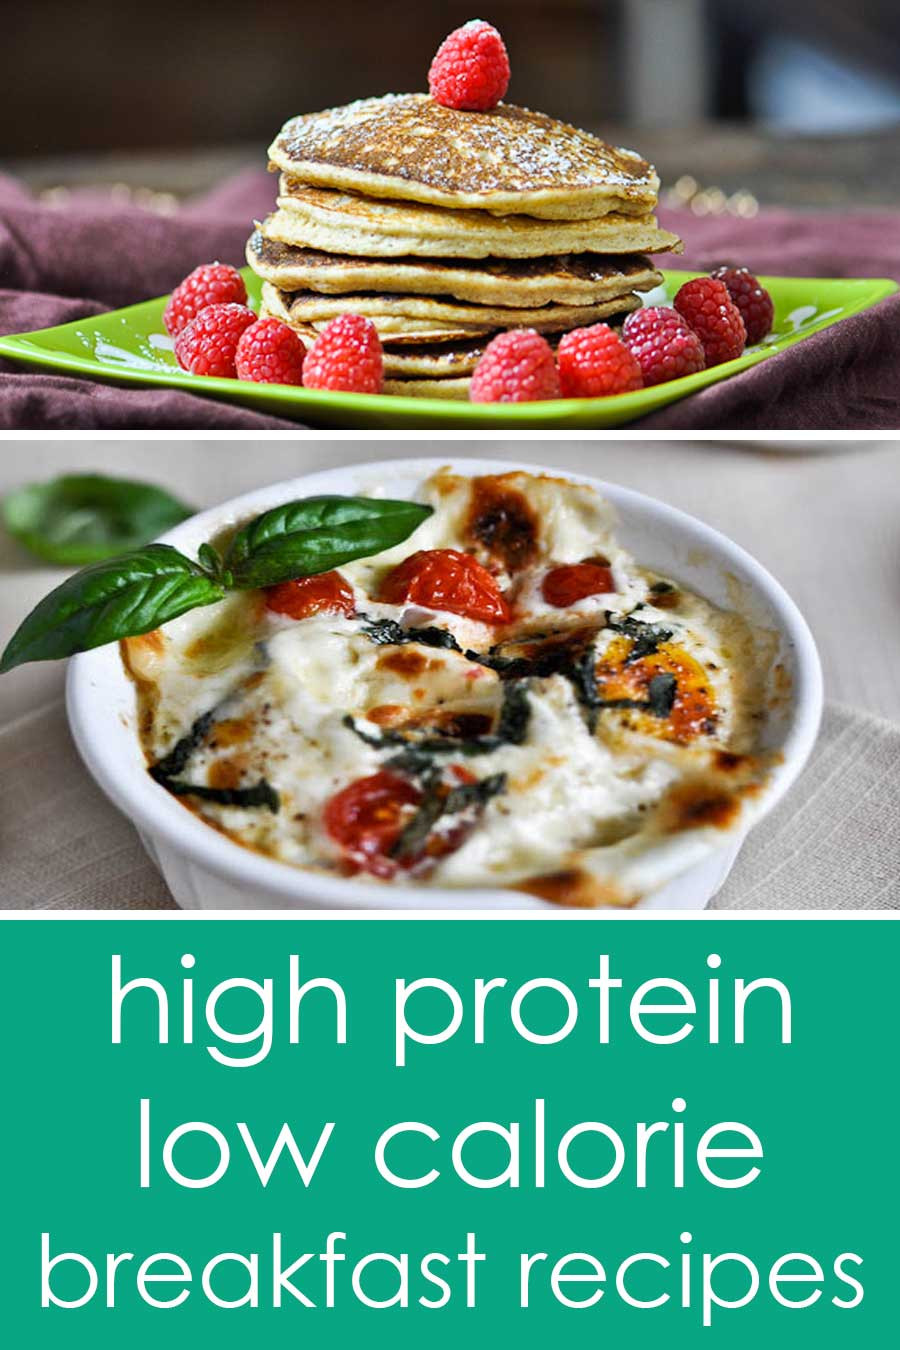 Low Calorie High Protein Recipes
 22 High protein low calorie breakfast recipes